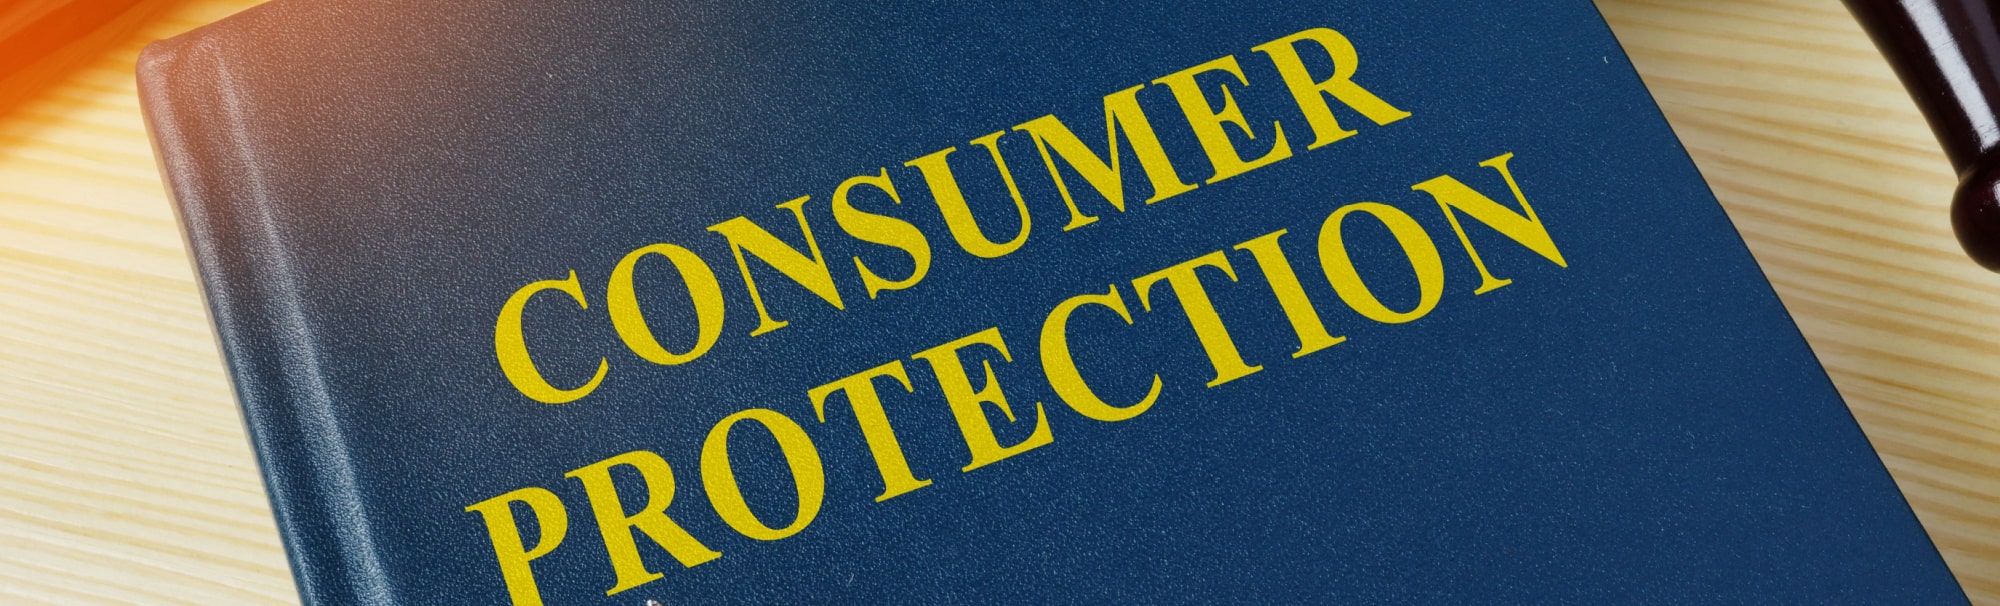 image of the new york state kratom consumer protection act